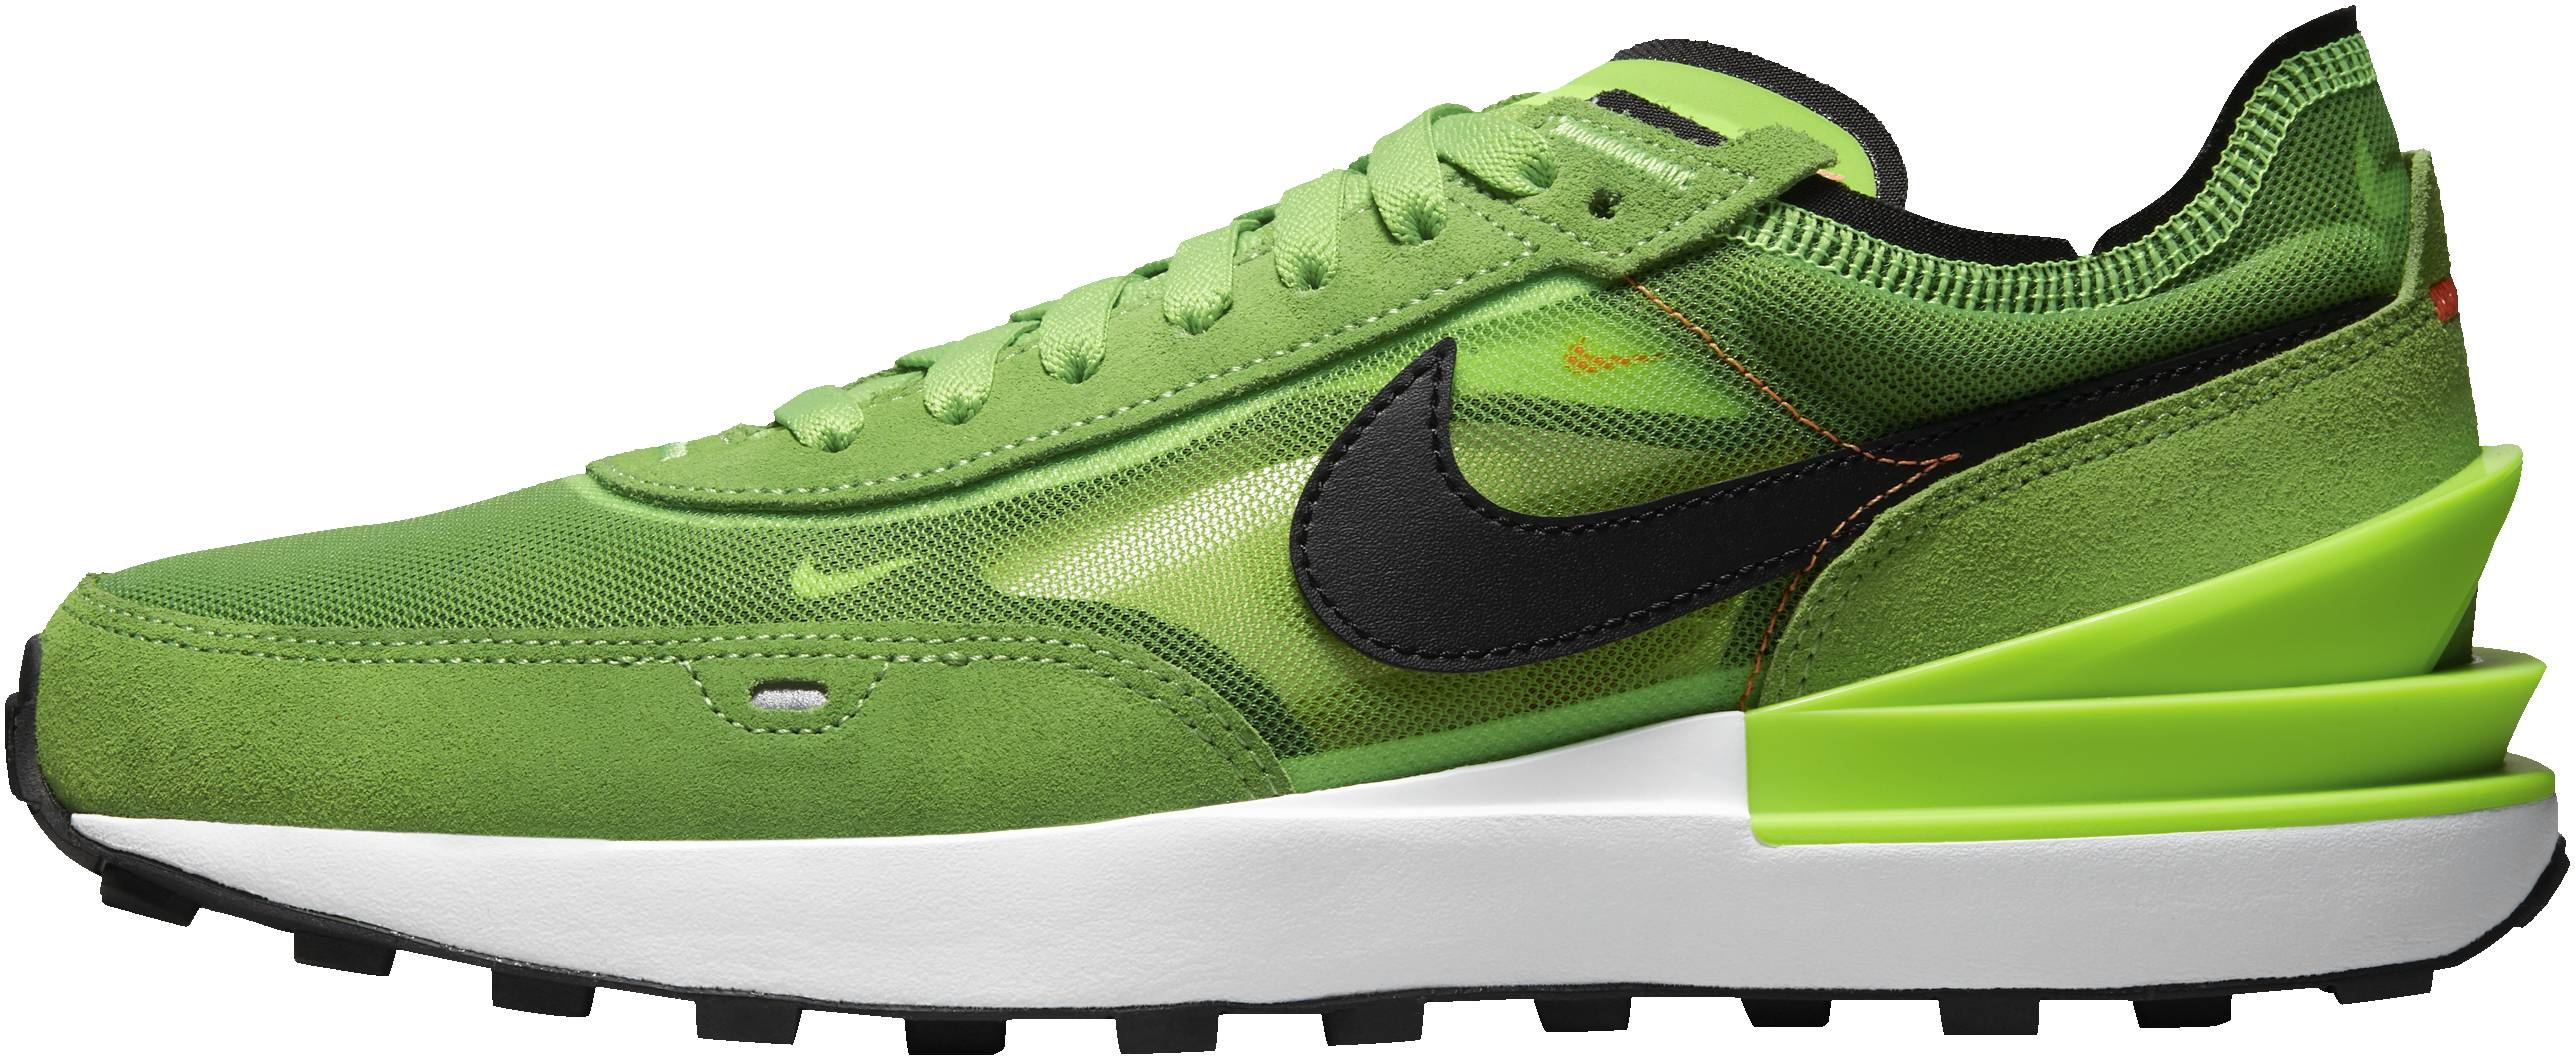 green nikes shoes